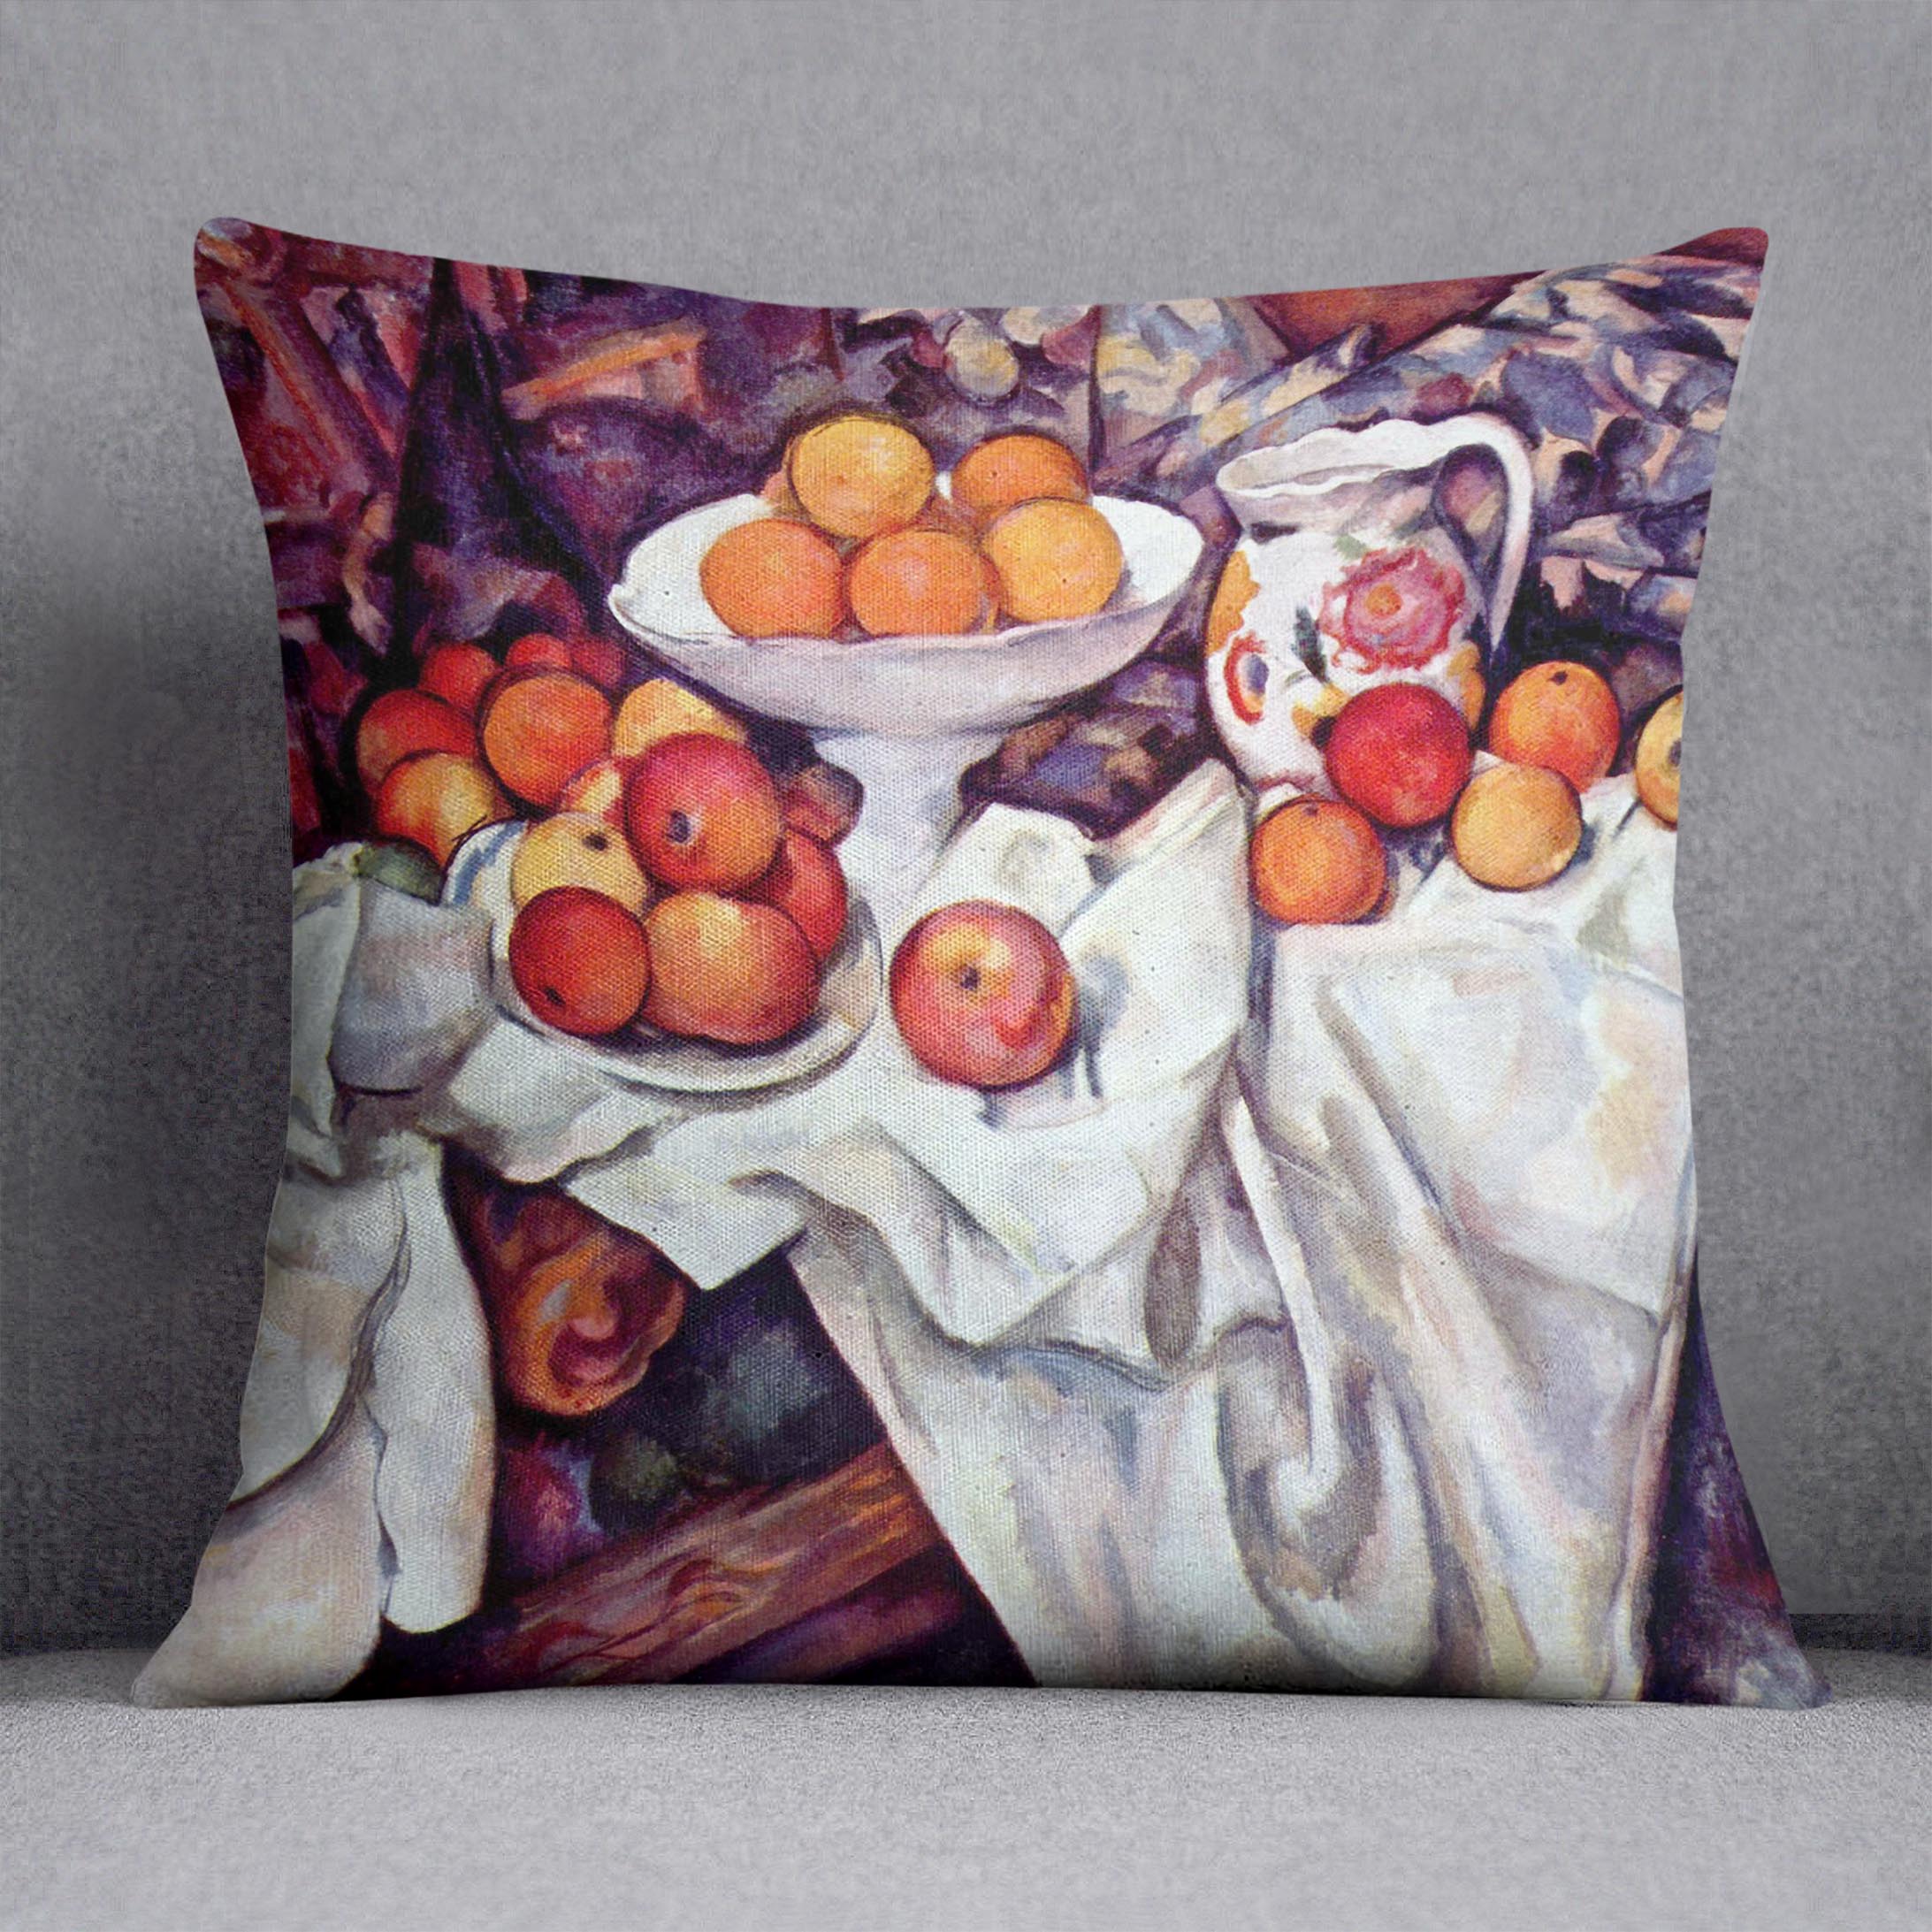 Still Life with Apples and Oranges by Cezanne Cushion - Canvas Art Rocks - 1